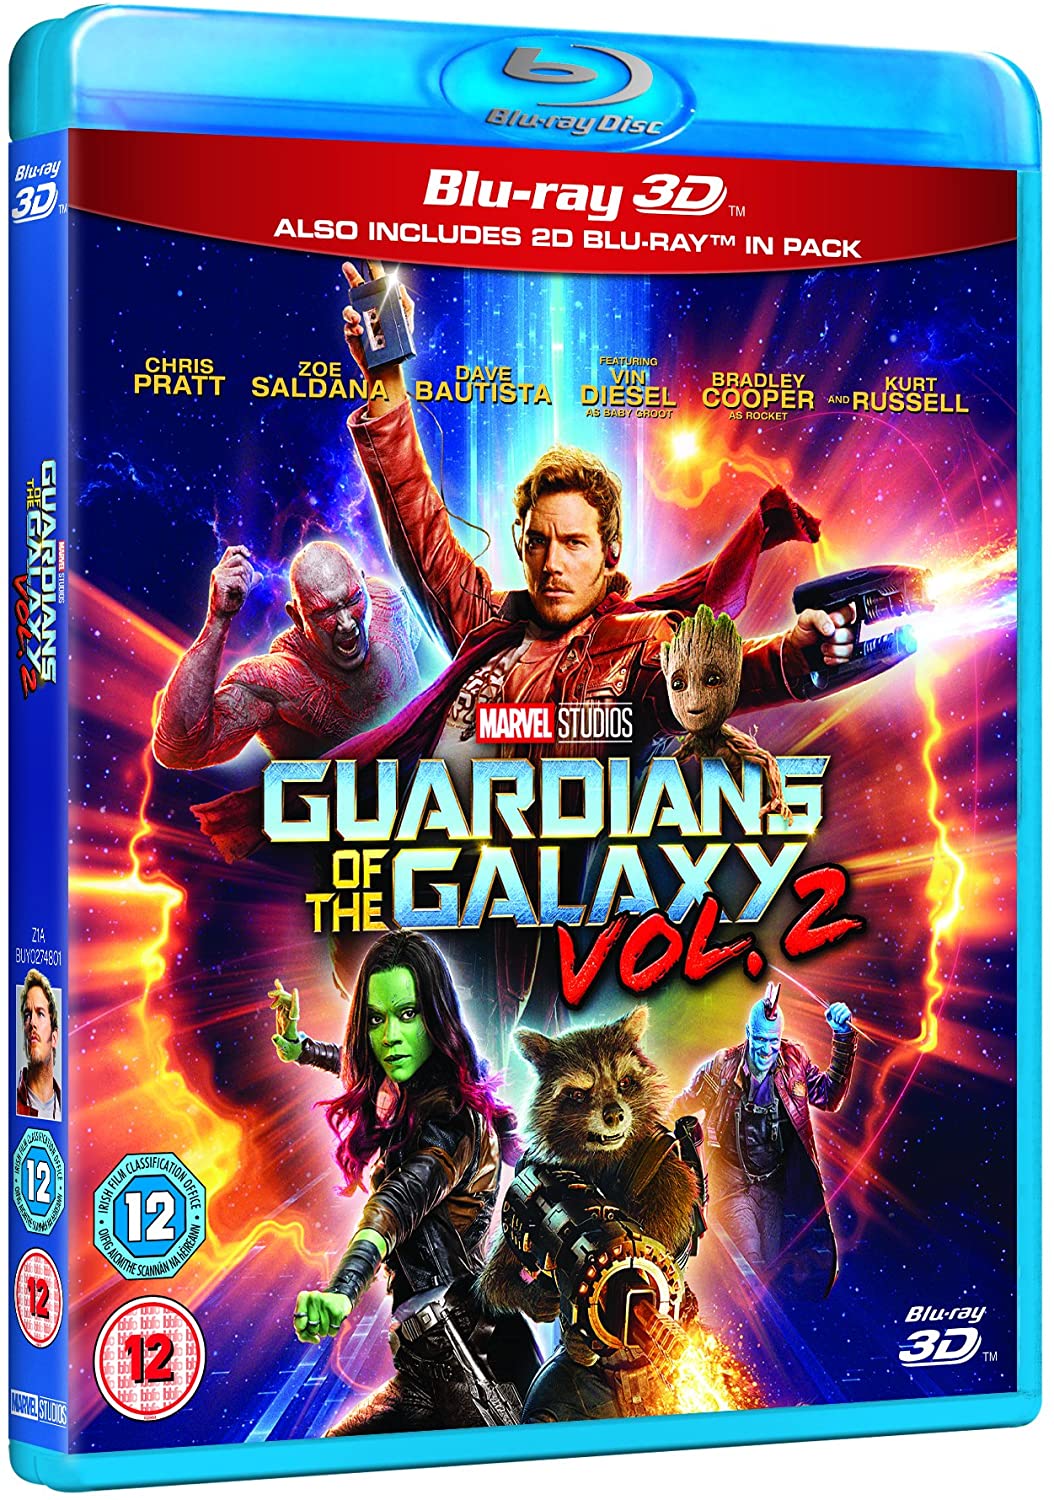 Marvel Studios Guardians of the Galaxy Vol. 2 - Action/Sci-fi [Blu-ray]